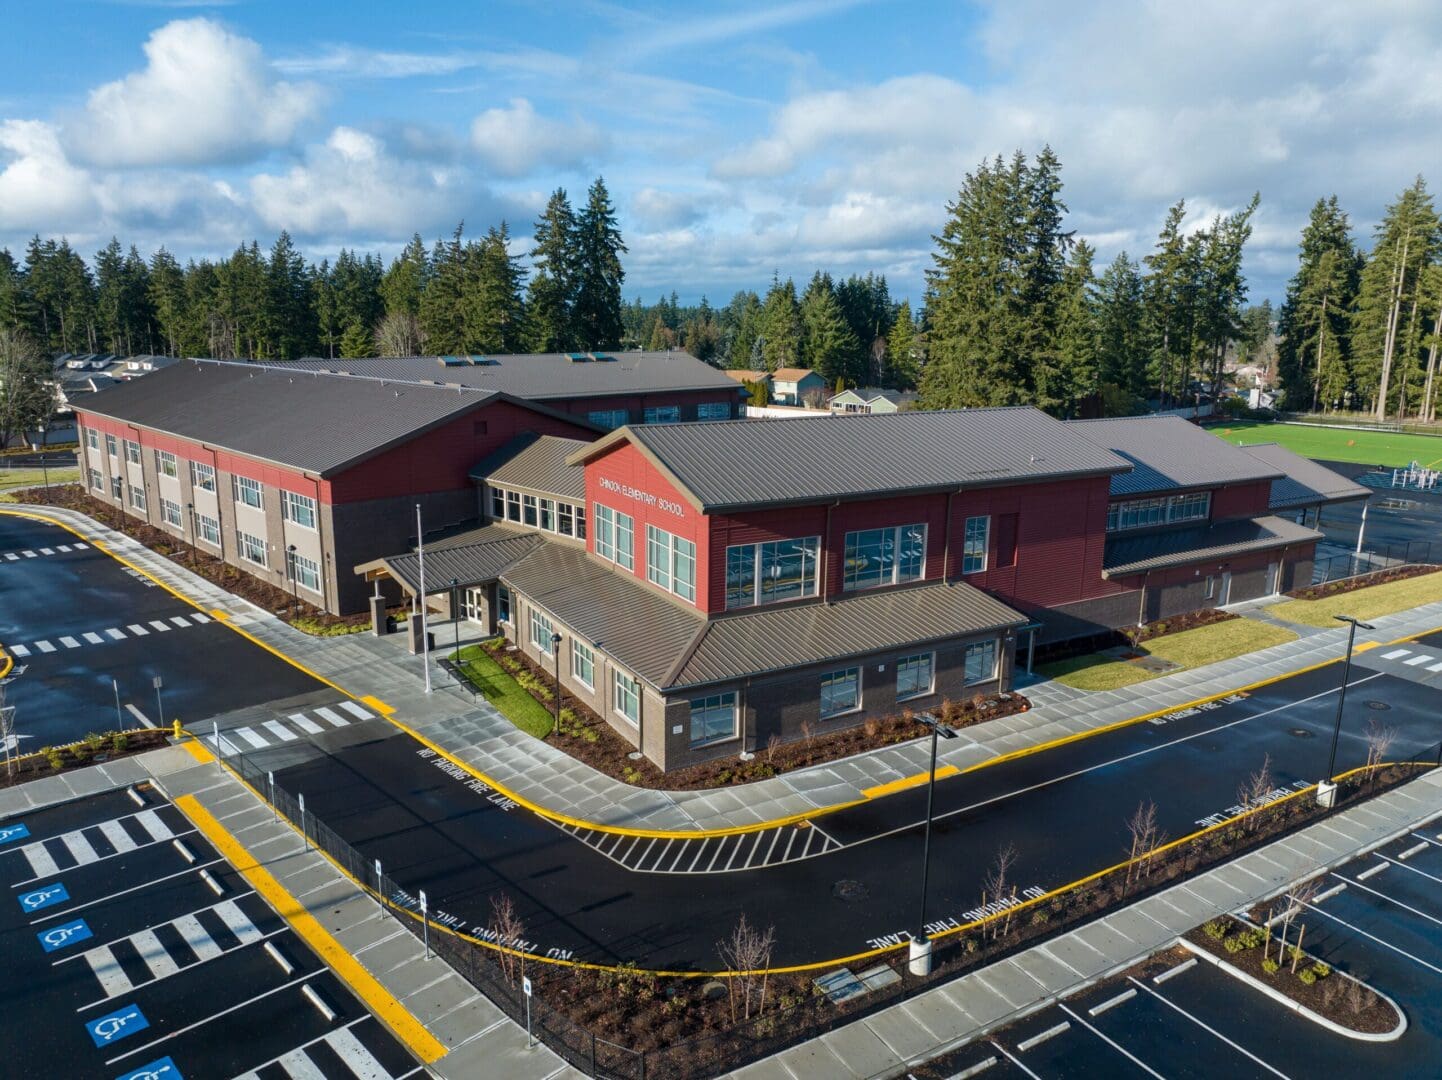 An aerial view of a school building and parking lot.